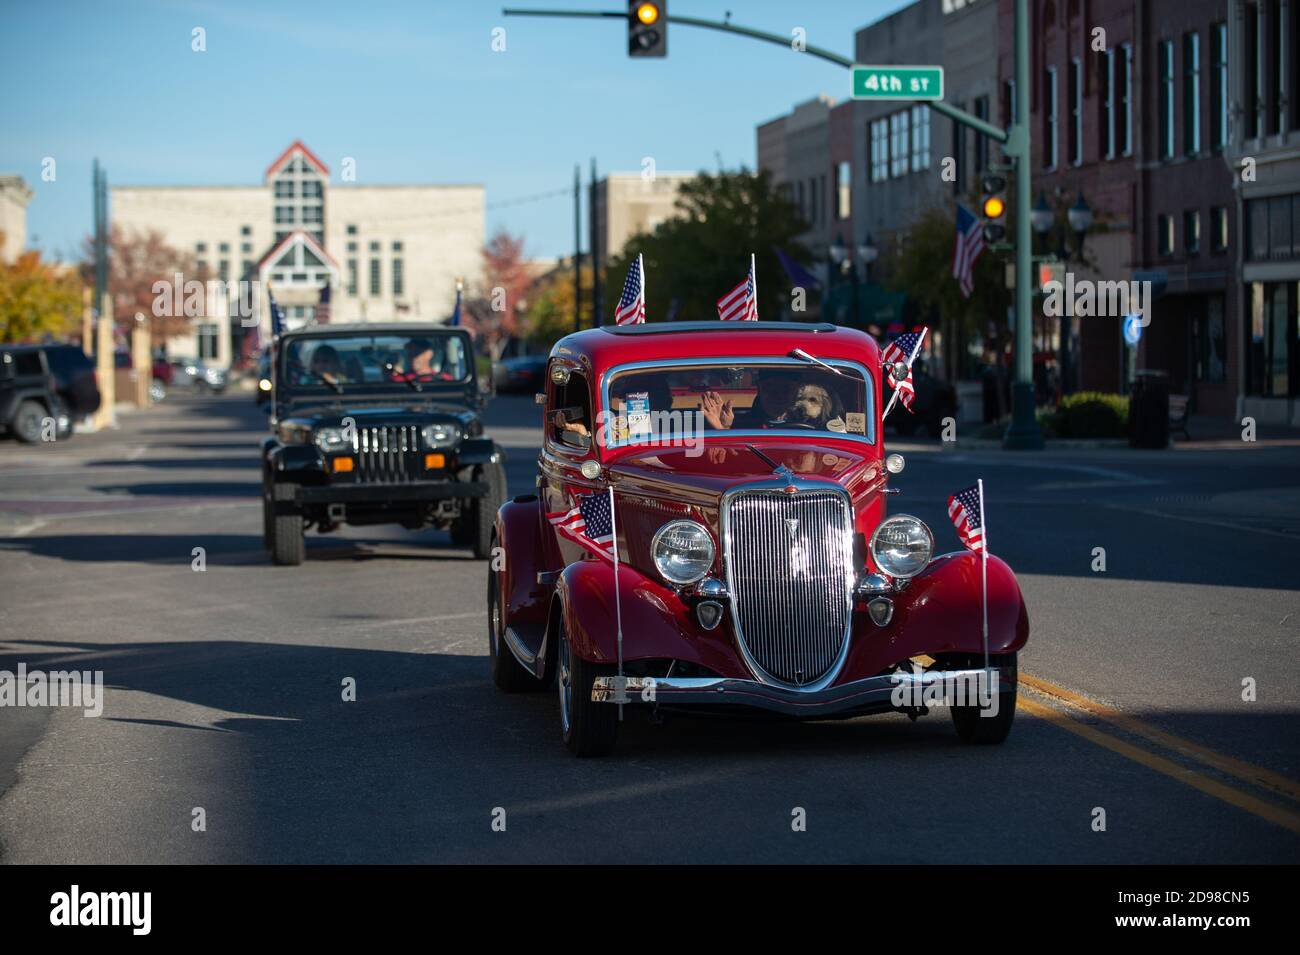 Manhattan, Kansas, USA. 1st Nov, 2020. Trump supporters drive an antique car down Poyntz Avenue on Sunday during a Turmp parade. Heartland Trump Parades hosted a Trump Parade in Manhattan, Kansas on Sunday where around 165 cars and trucks showed up to show their support for President Donald Trump. The parade started in CiCo Park and drove through Historic downtown on Poyntz Avenue. Credit: Luke Townsend/ZUMA Wire/Alamy Live News Stock Photo